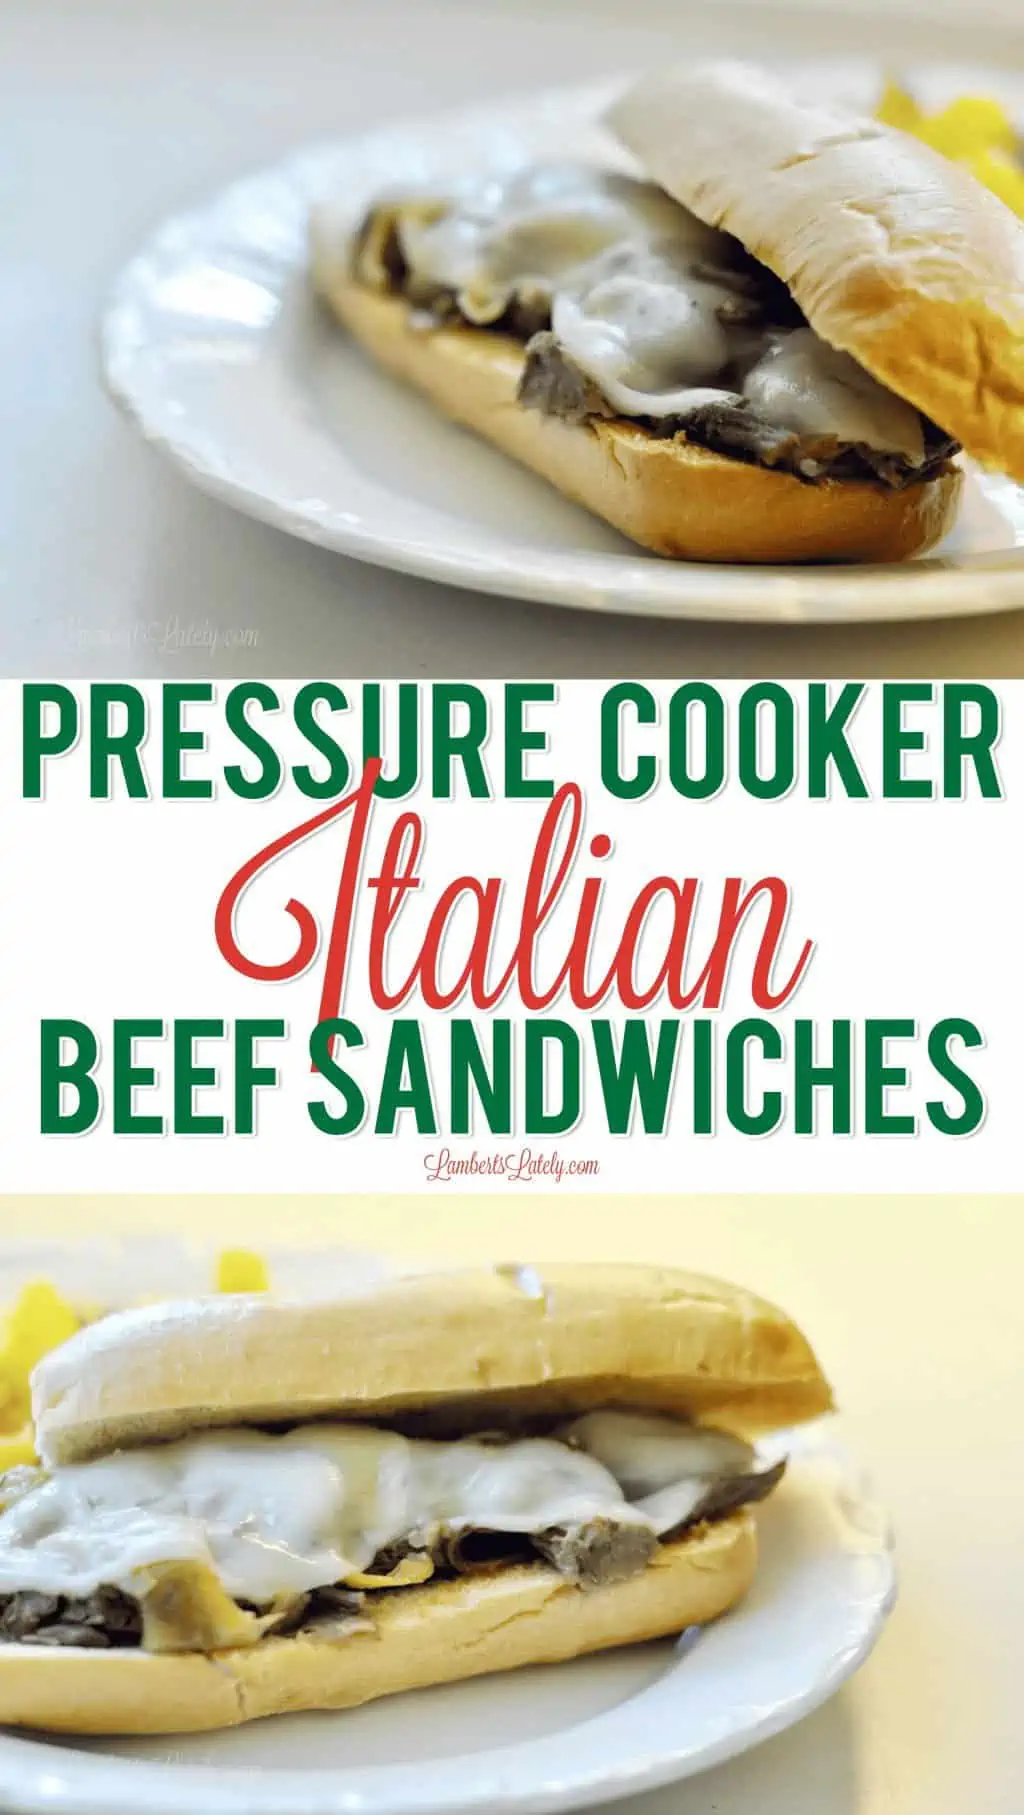 This recipe for Pressure Cooker Italian Beef Sandwiches is perfect for a weeknight - can be prepped easily in an Instant Pot is kid-approved!